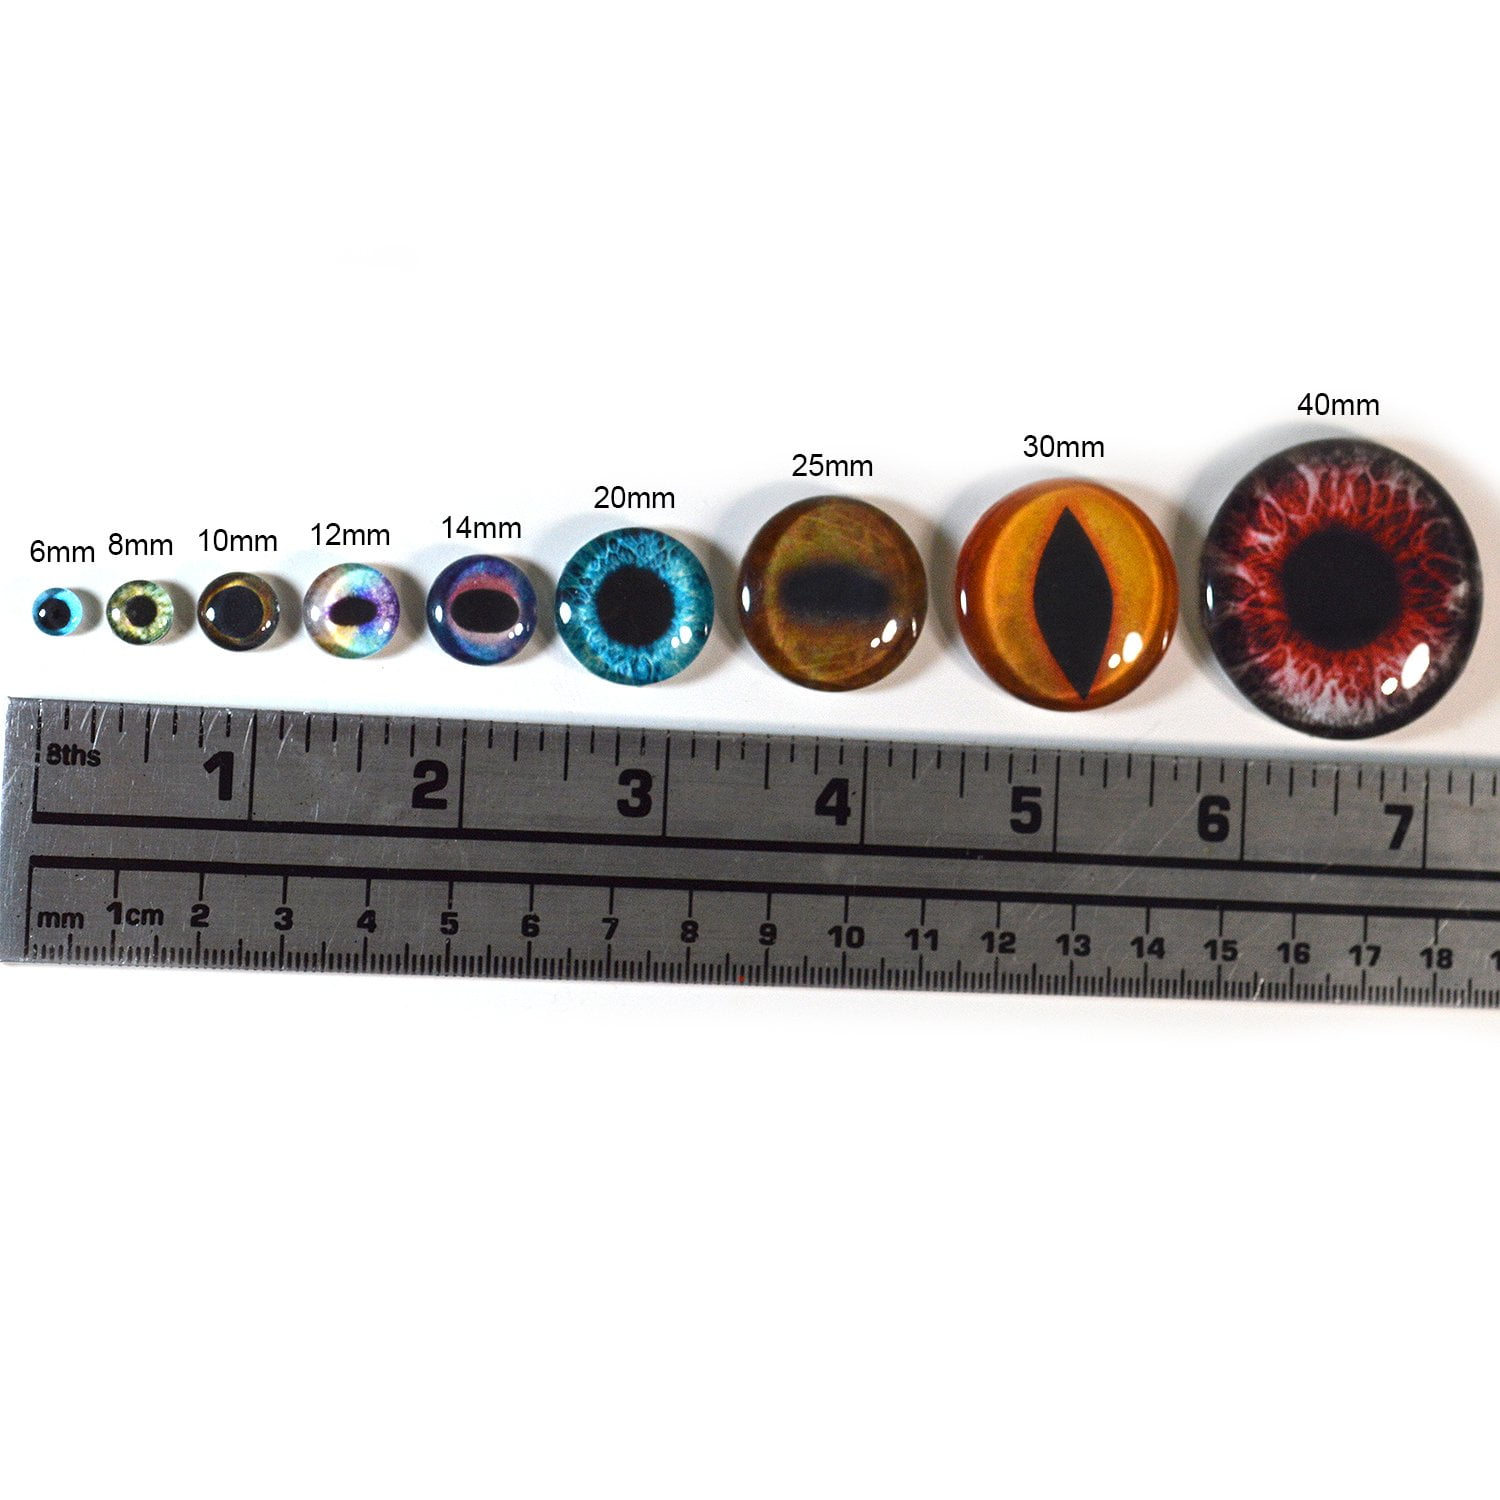 6mm Ring of Fire Glass Dragon Eyes Fantasy Art Dolls Taxidermy Sculptures or Jewelry Making Crafts Matching Set of 2